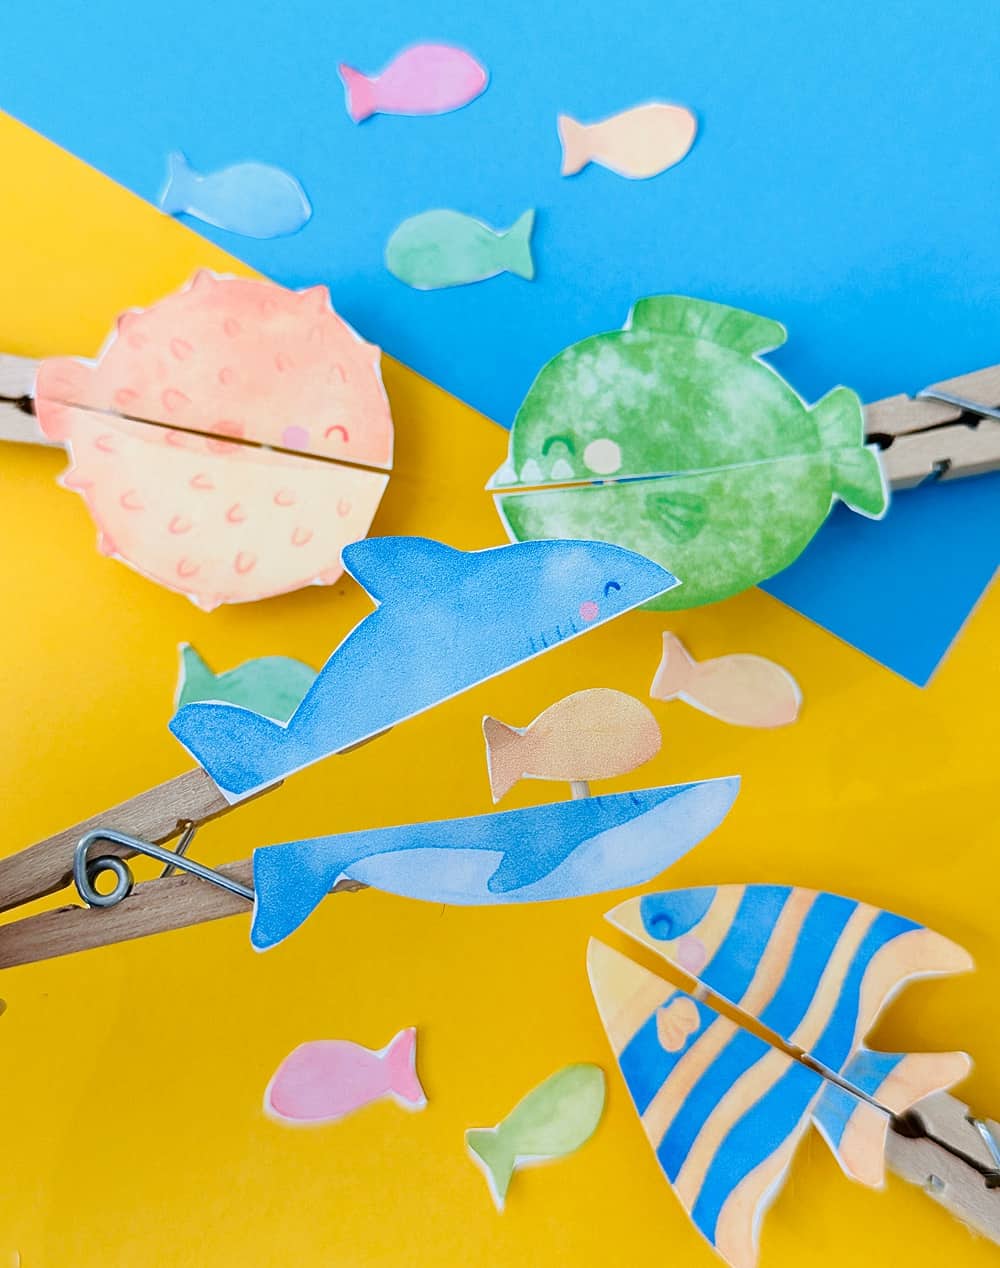 What Are The Best Easy and Inexpensive Art Projects for Kids?